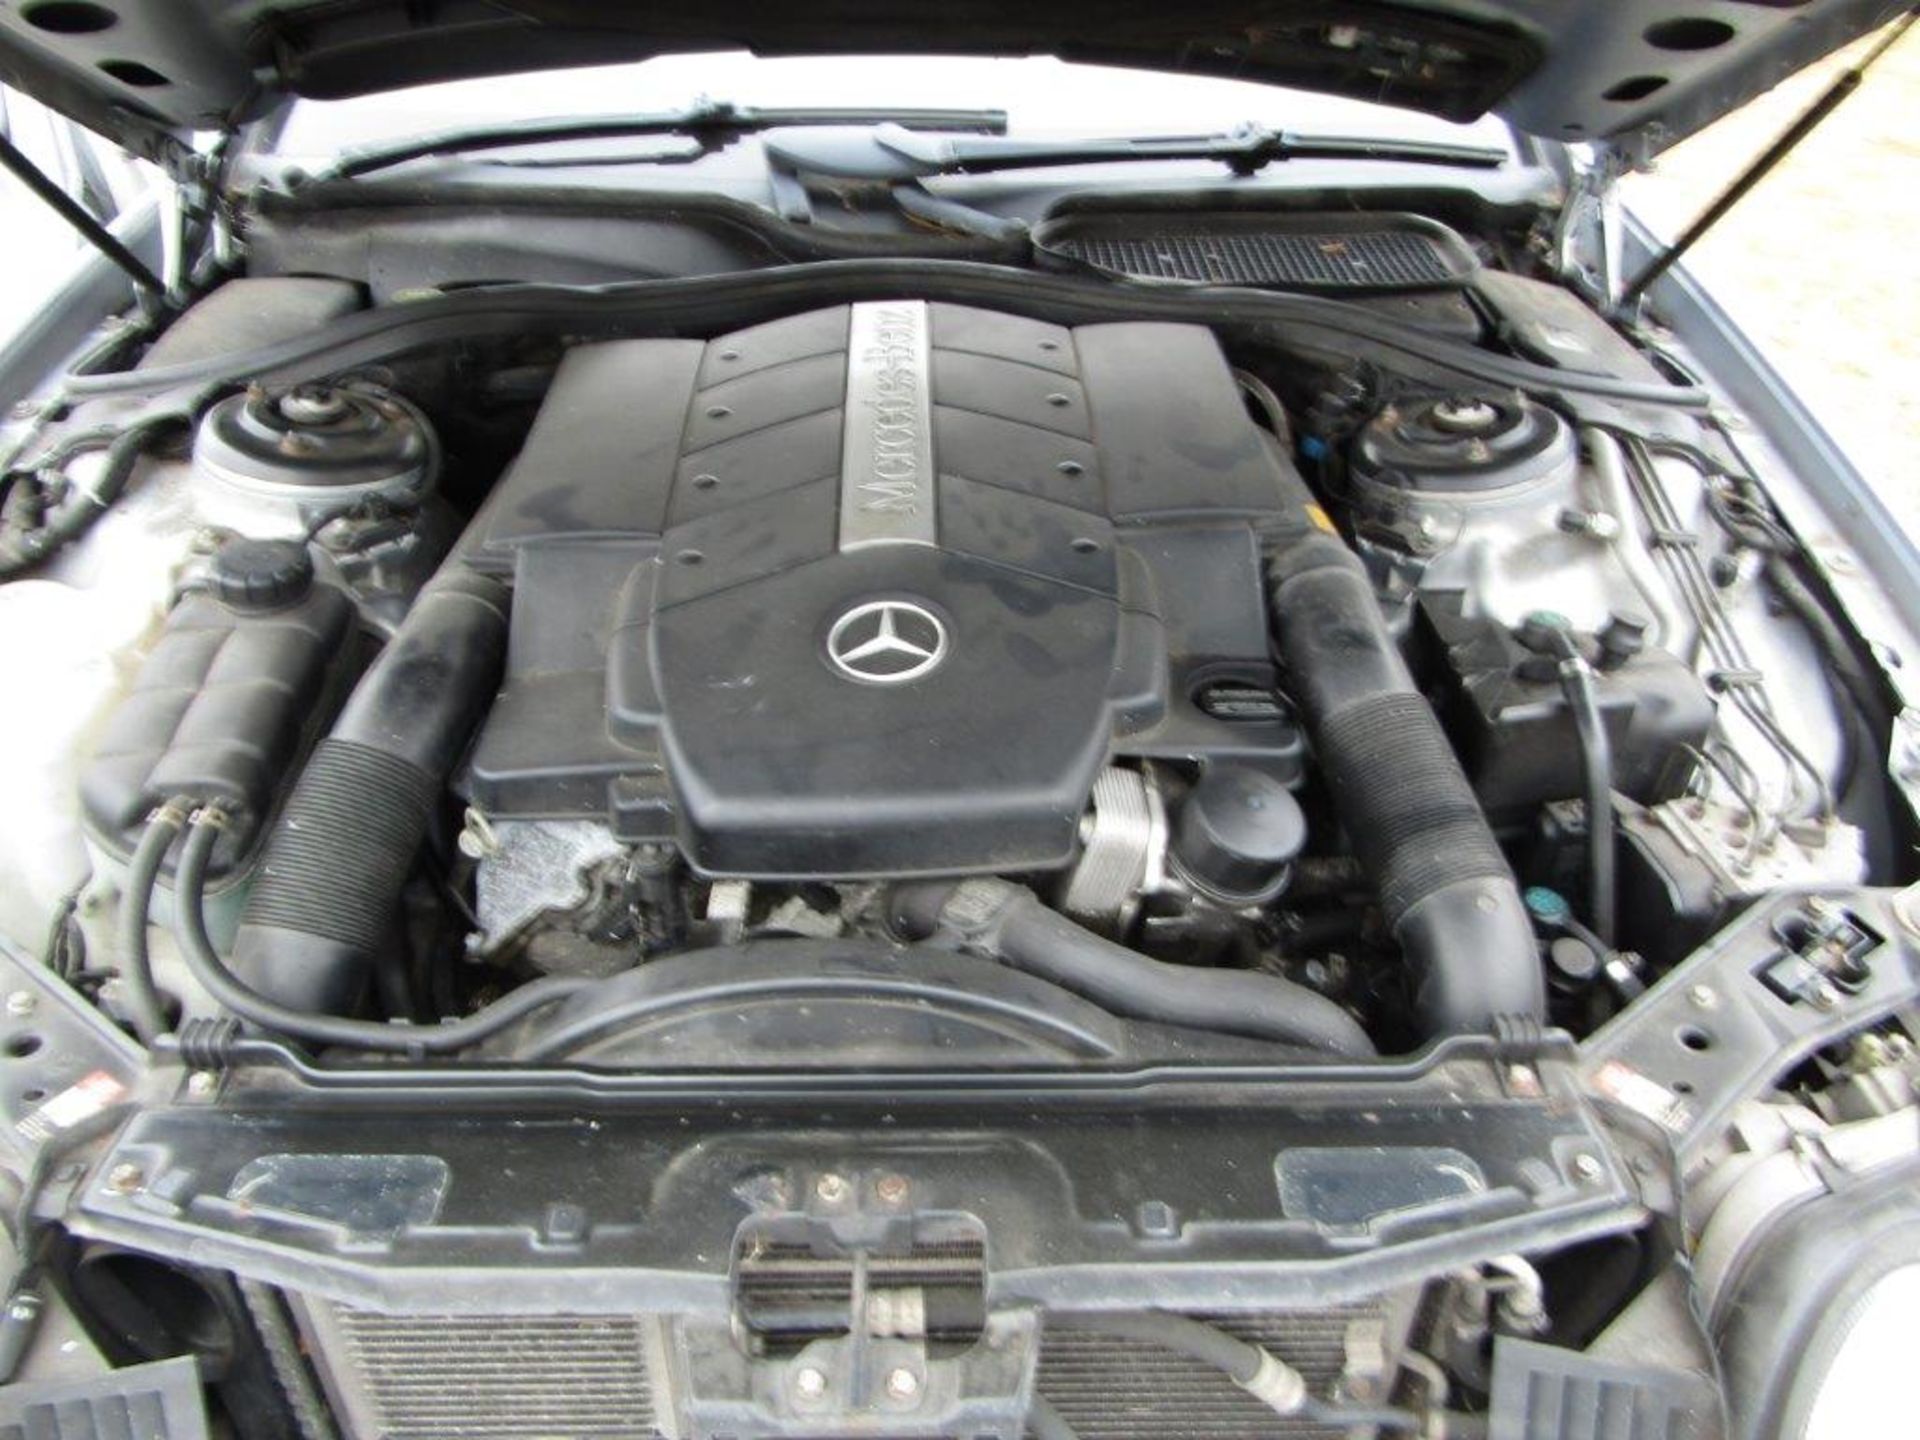 2002 Mercedes CL500 Coupe - Image 12 of 12